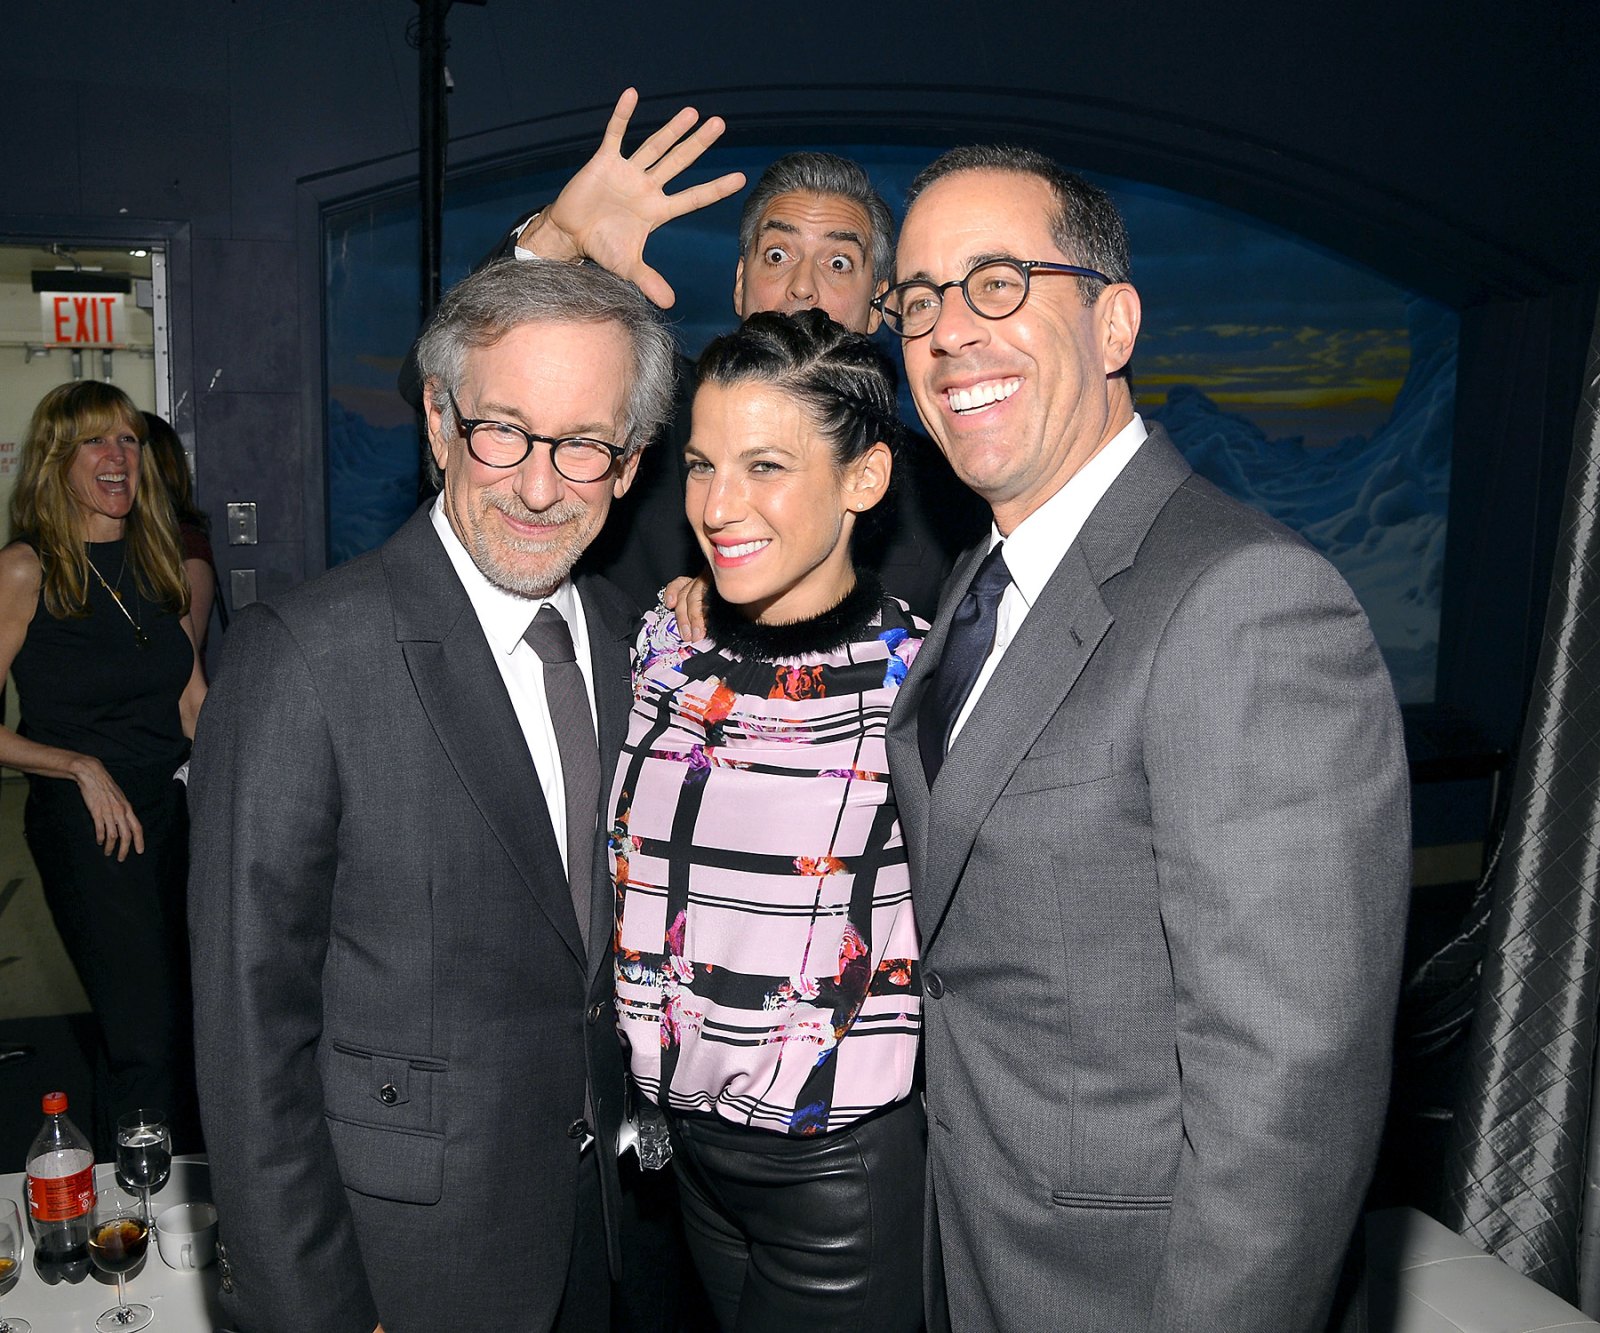 Steven Spielberg, Jessica Seinfeld, George Clooney and Jerry Seinfeld